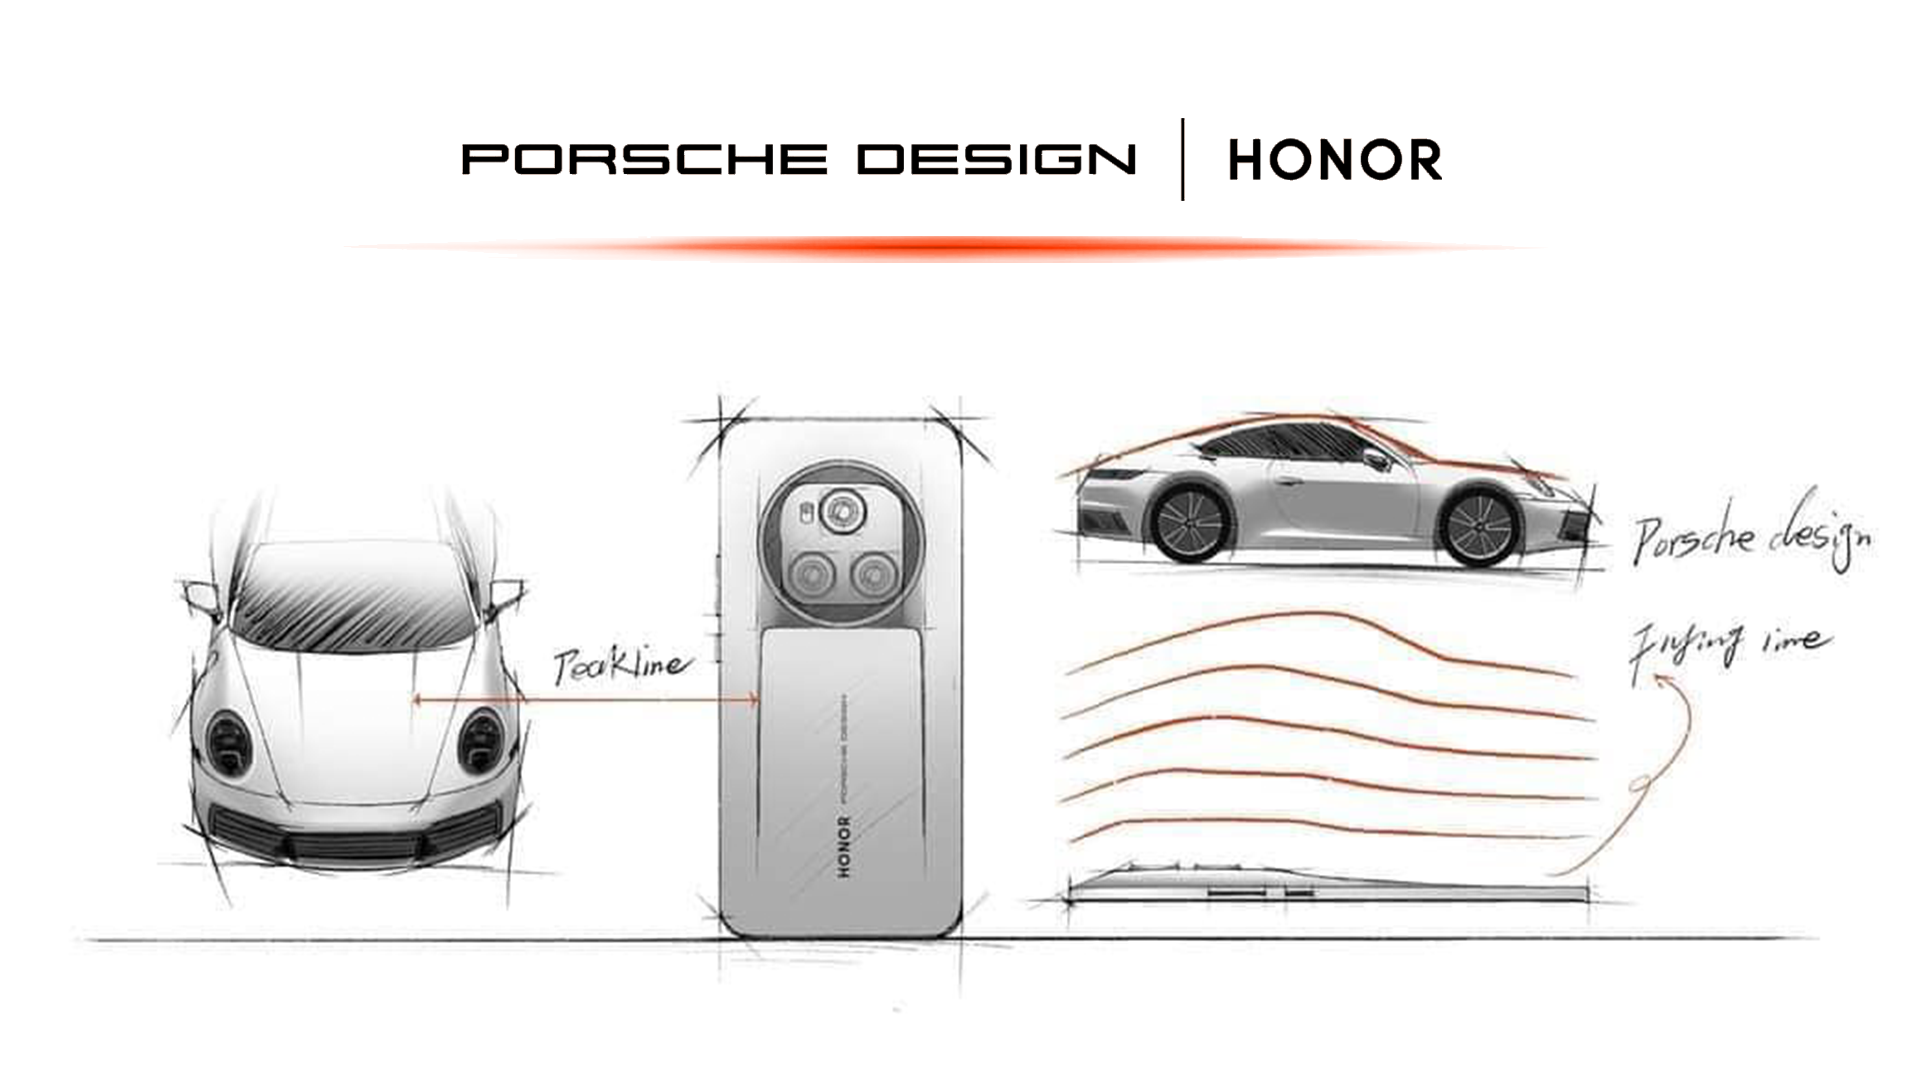 Porsche Design and HONOR Join Forces to Combine Cutting-Edge Technologies with Functional Design 